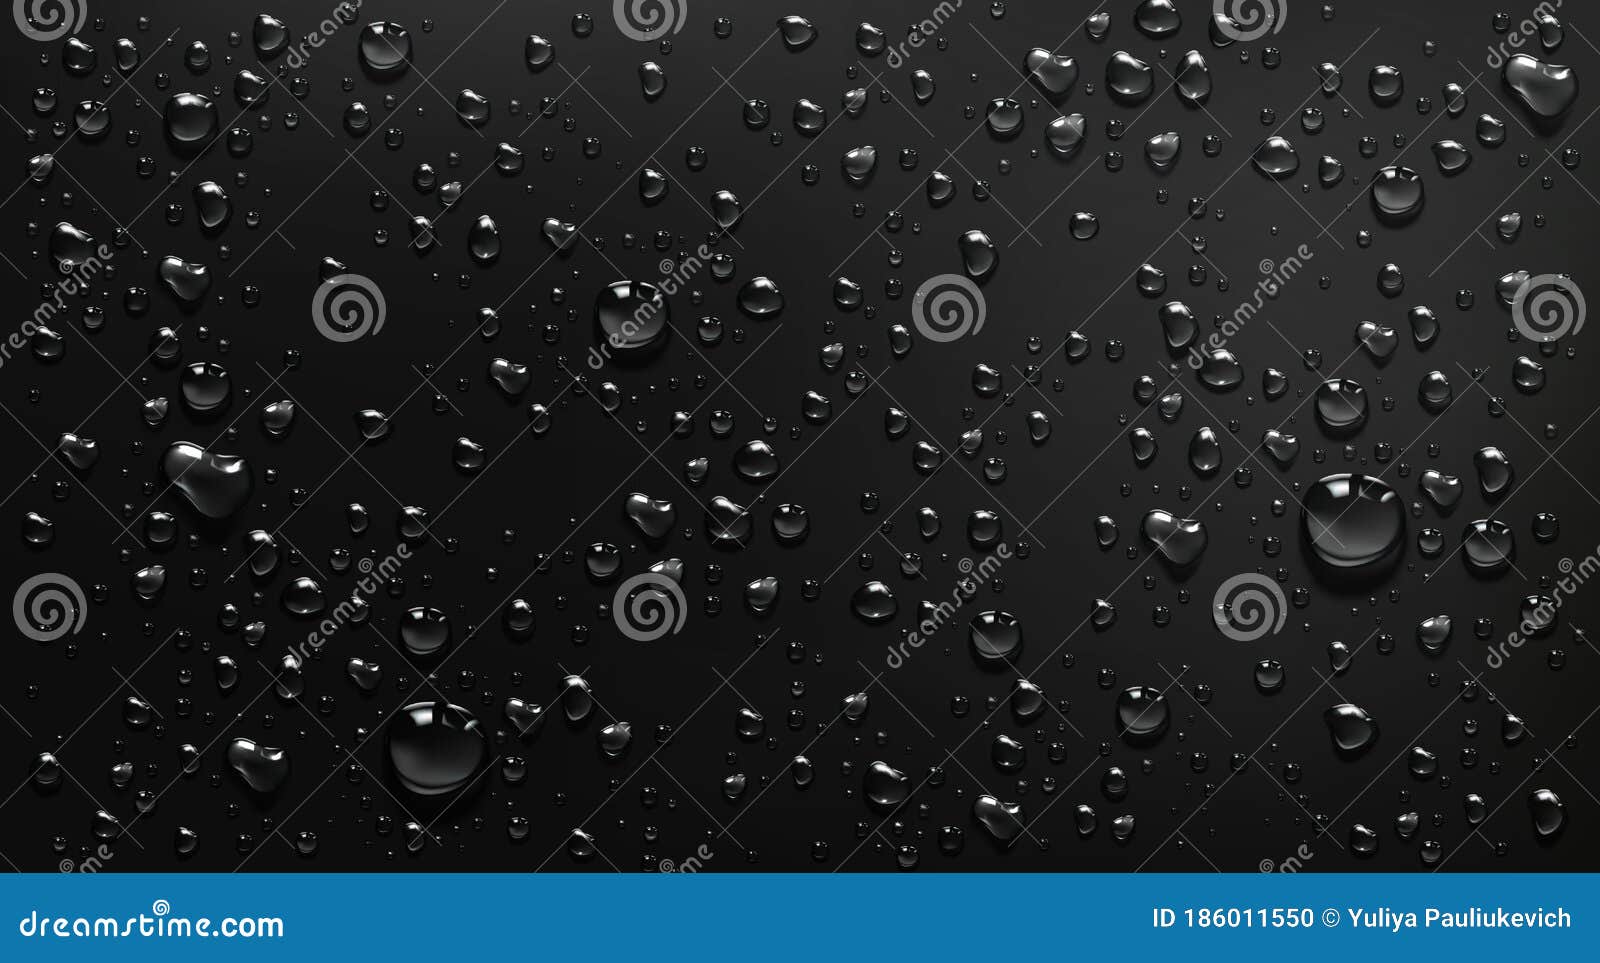 condensation water drops on black glass background